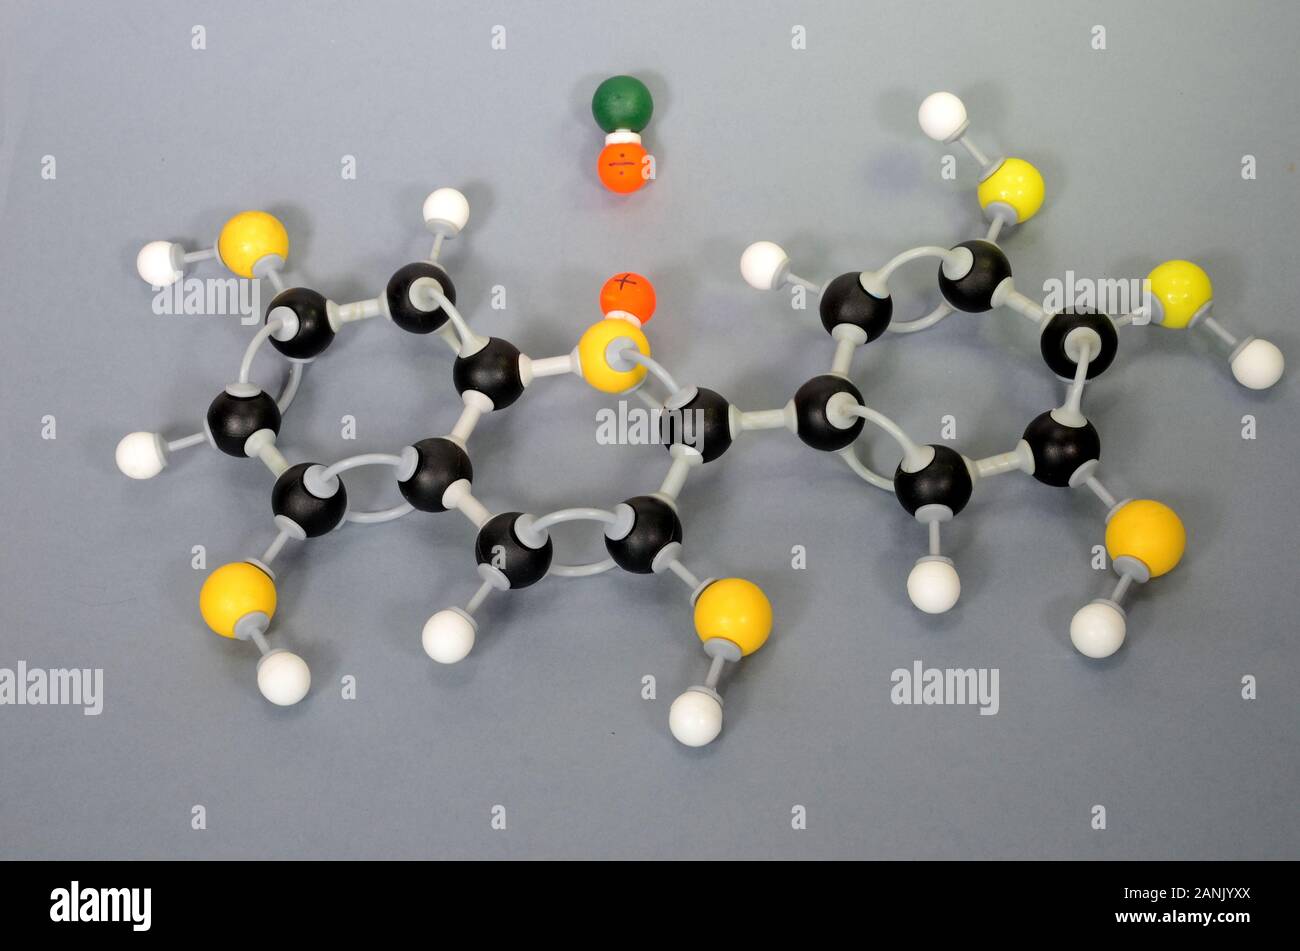 Molecule model of Paraffin. White is Hydrogen, black is Carbon, yellow is Oxygen and green is Chlorine. The orange spheres represent charges in a coor Stock Photo